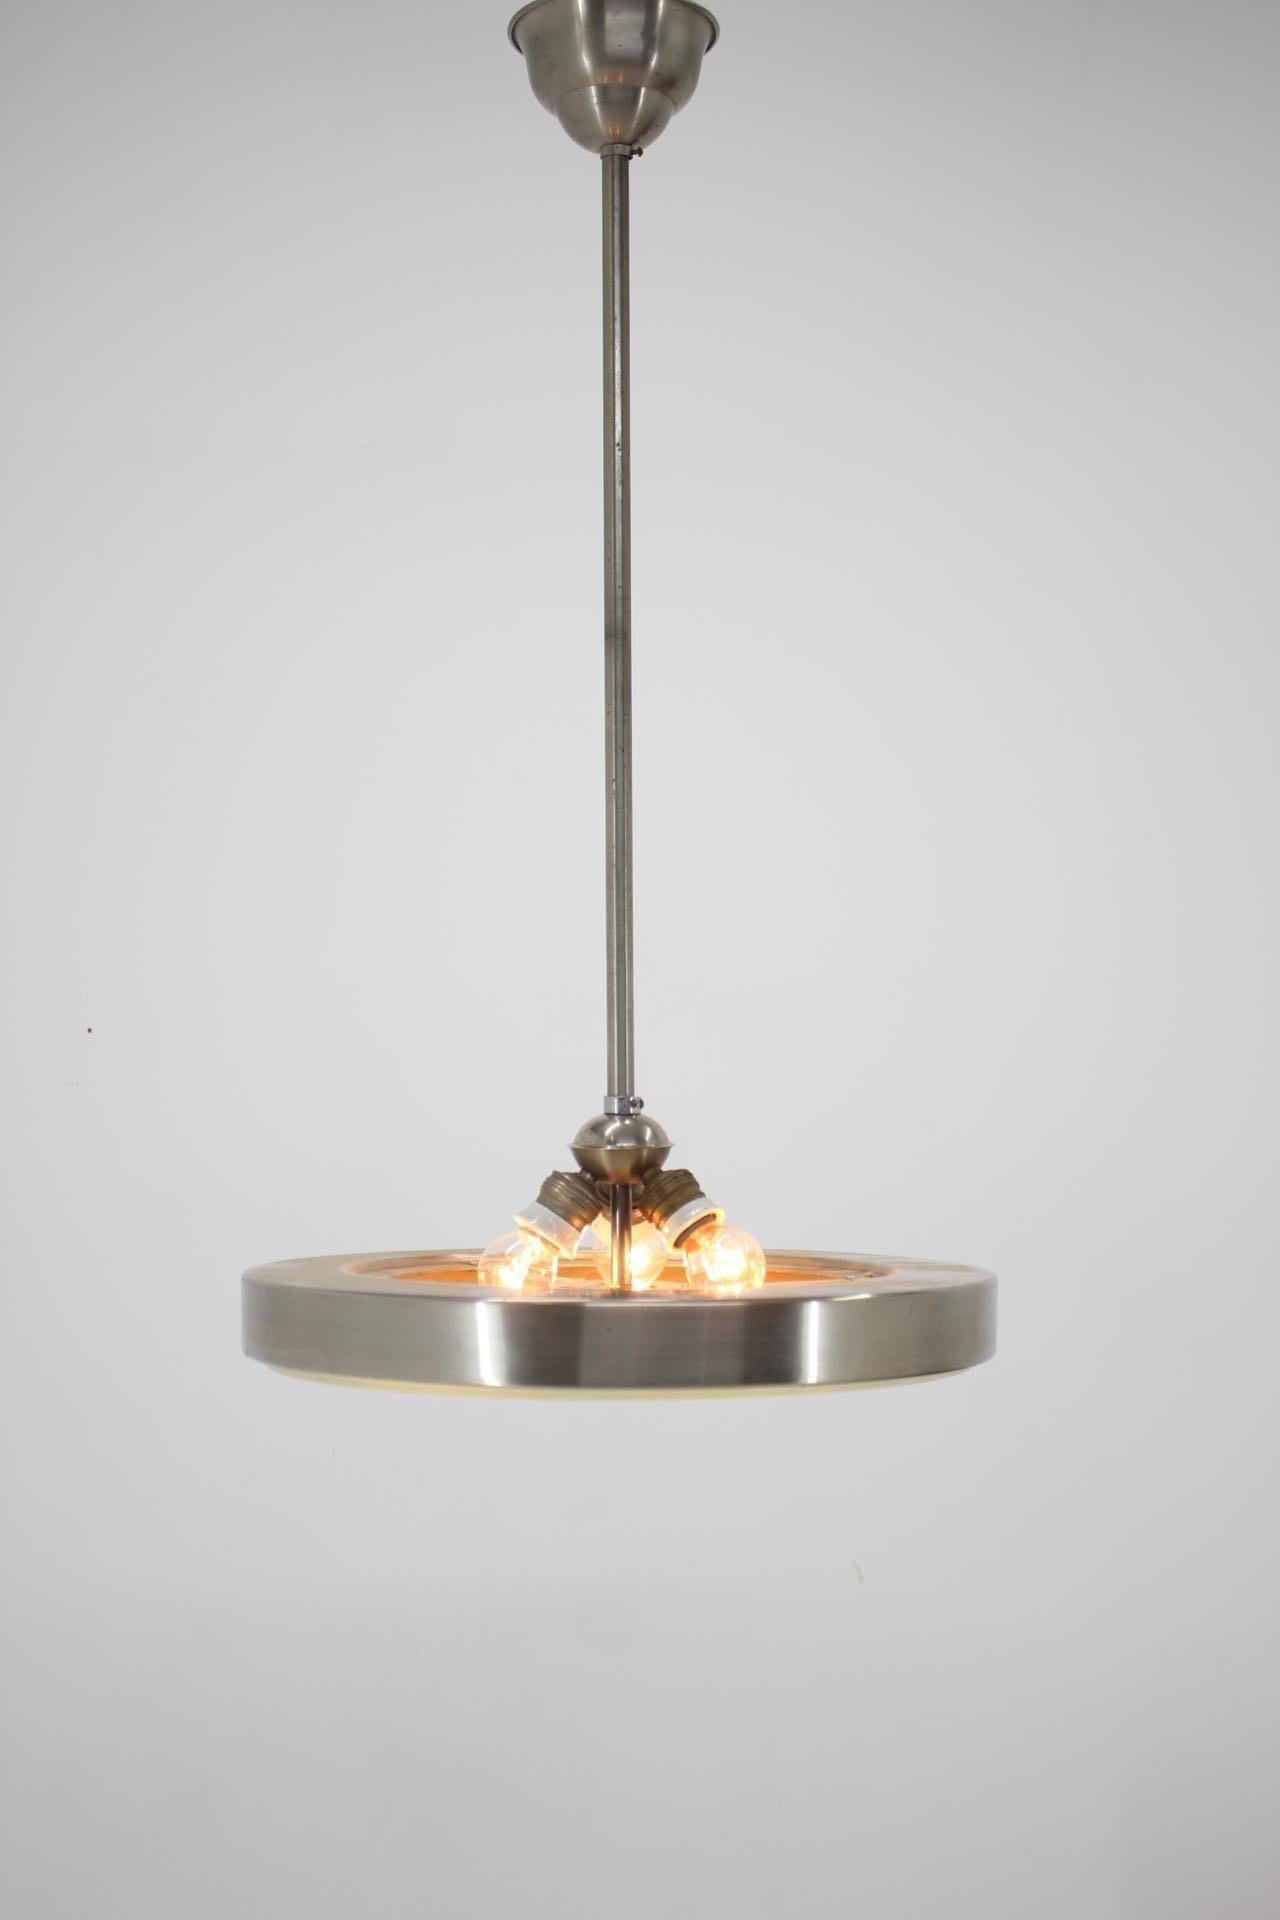 Unique Chrome and Glass Bauhaus Pendant, 1930s In Good Condition For Sale In Praha, CZ